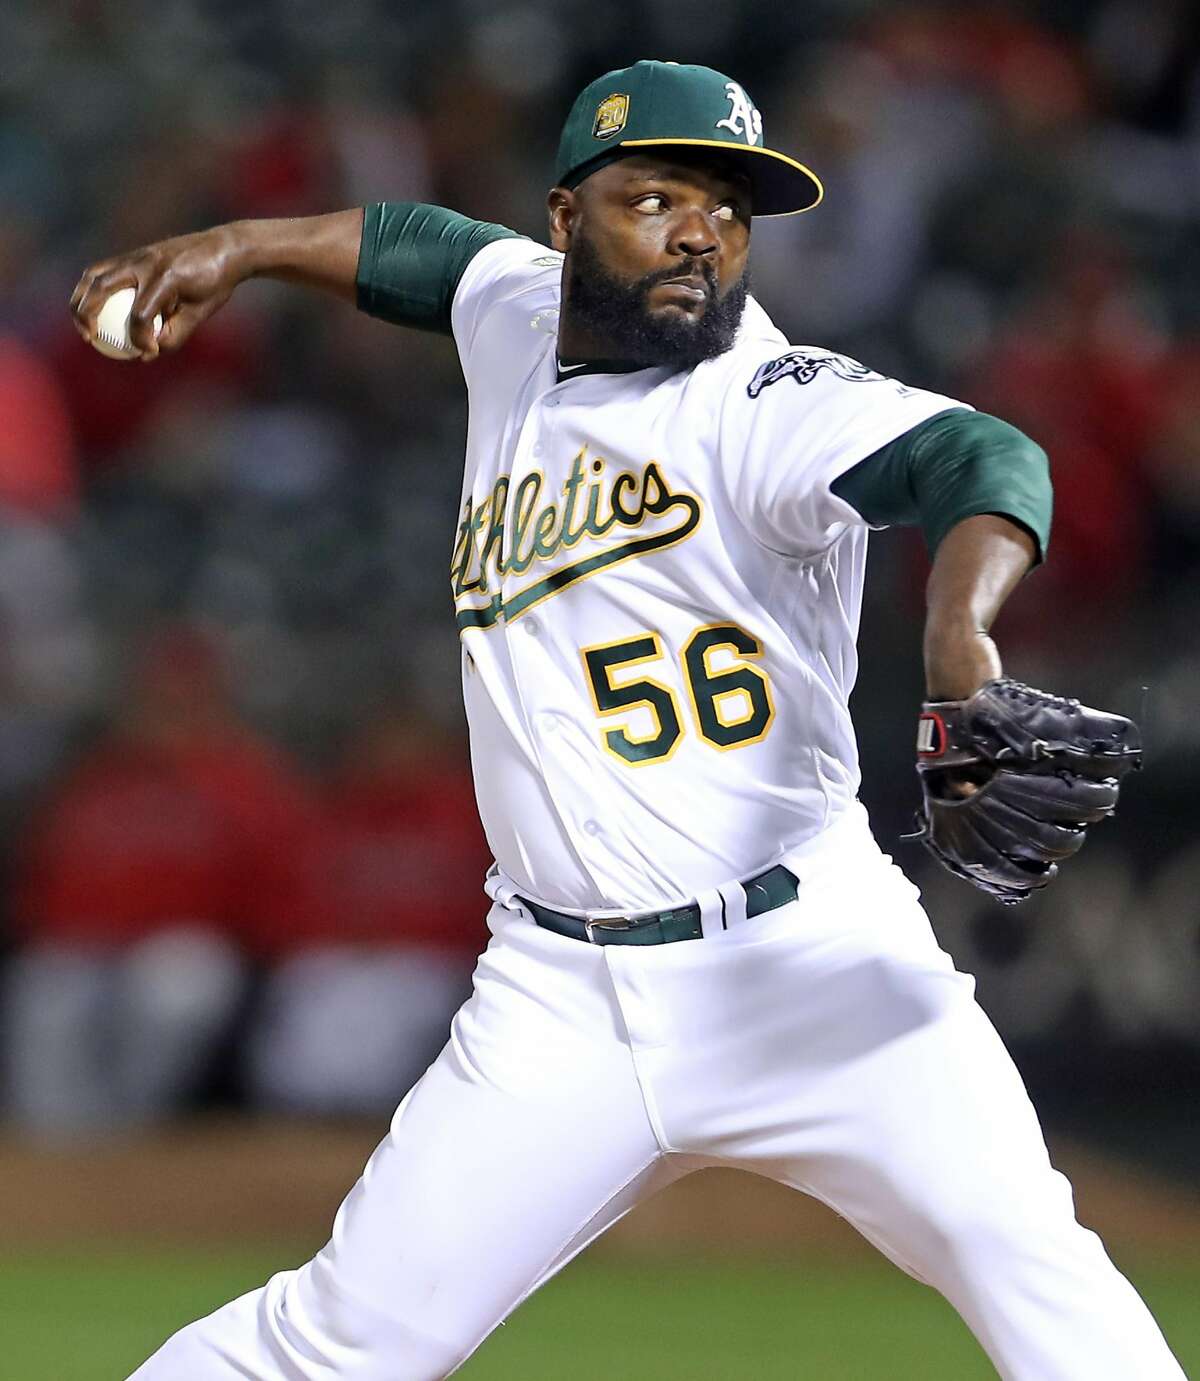 Oakland Athletics' Fernando Rodney pitches in 9th inning of Los Angeles Angels' 9-7 win in MLB game at Oakland Coliseum in Oakland, Calif. on Tuesday, September 18, 2018.